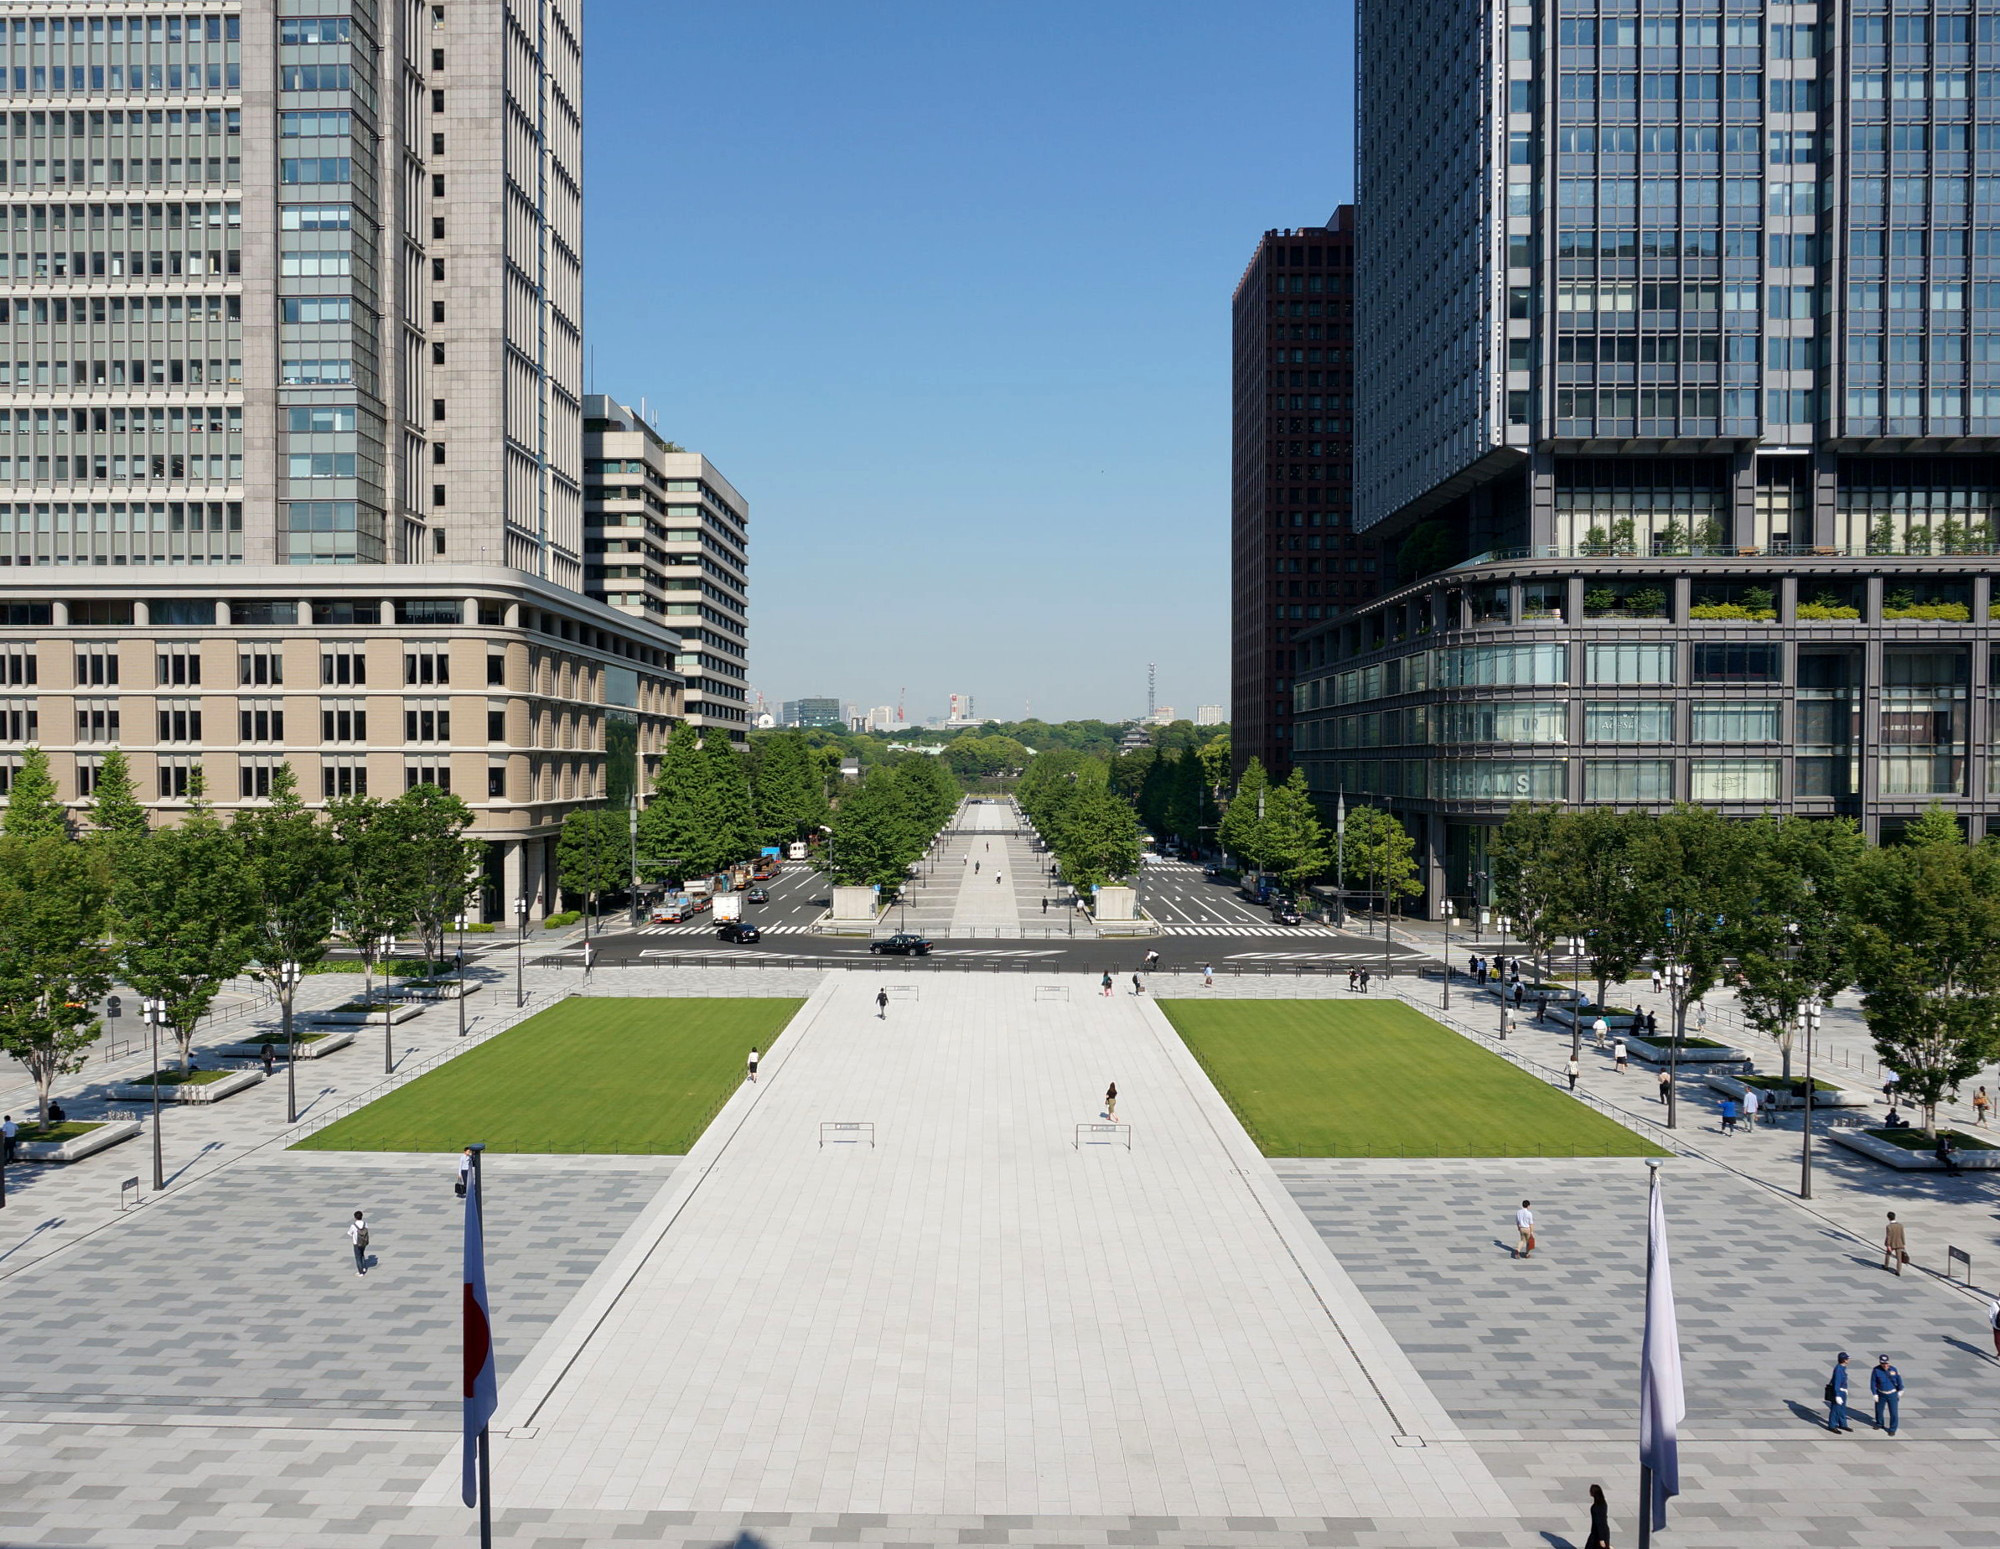 The landscape of Tokyo Marunouchi Station Square and Gyoko Street Area